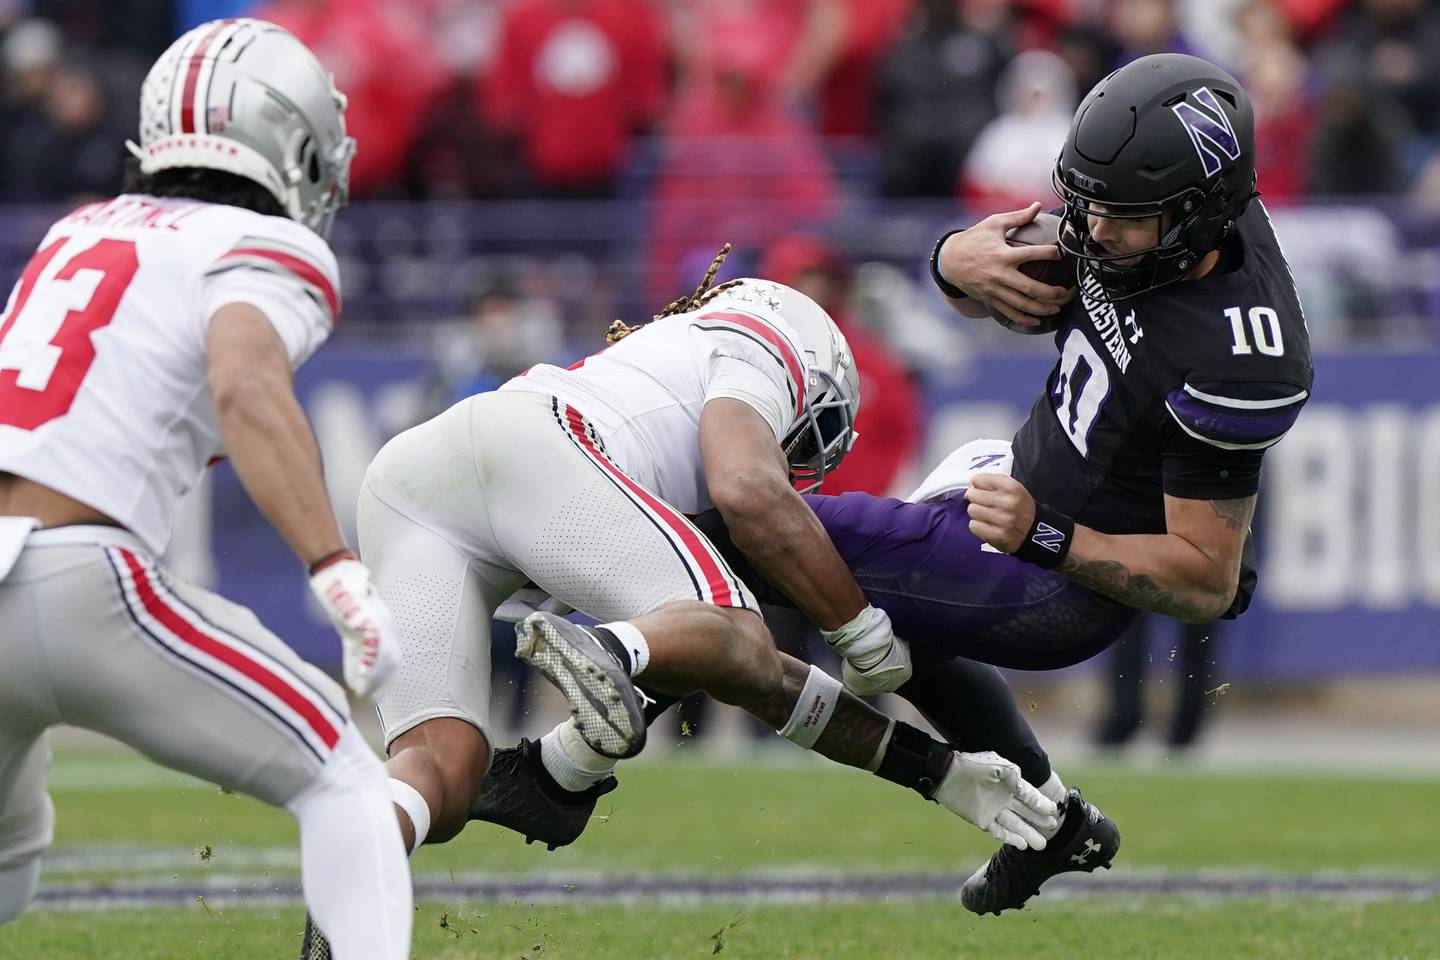 Northwestern quarterback Brendan Sullivan, right, is tackled by Ohio State safety Ronnie Hickman during the second half Saturday in Evanston. The Wildcats lost 21-7. 